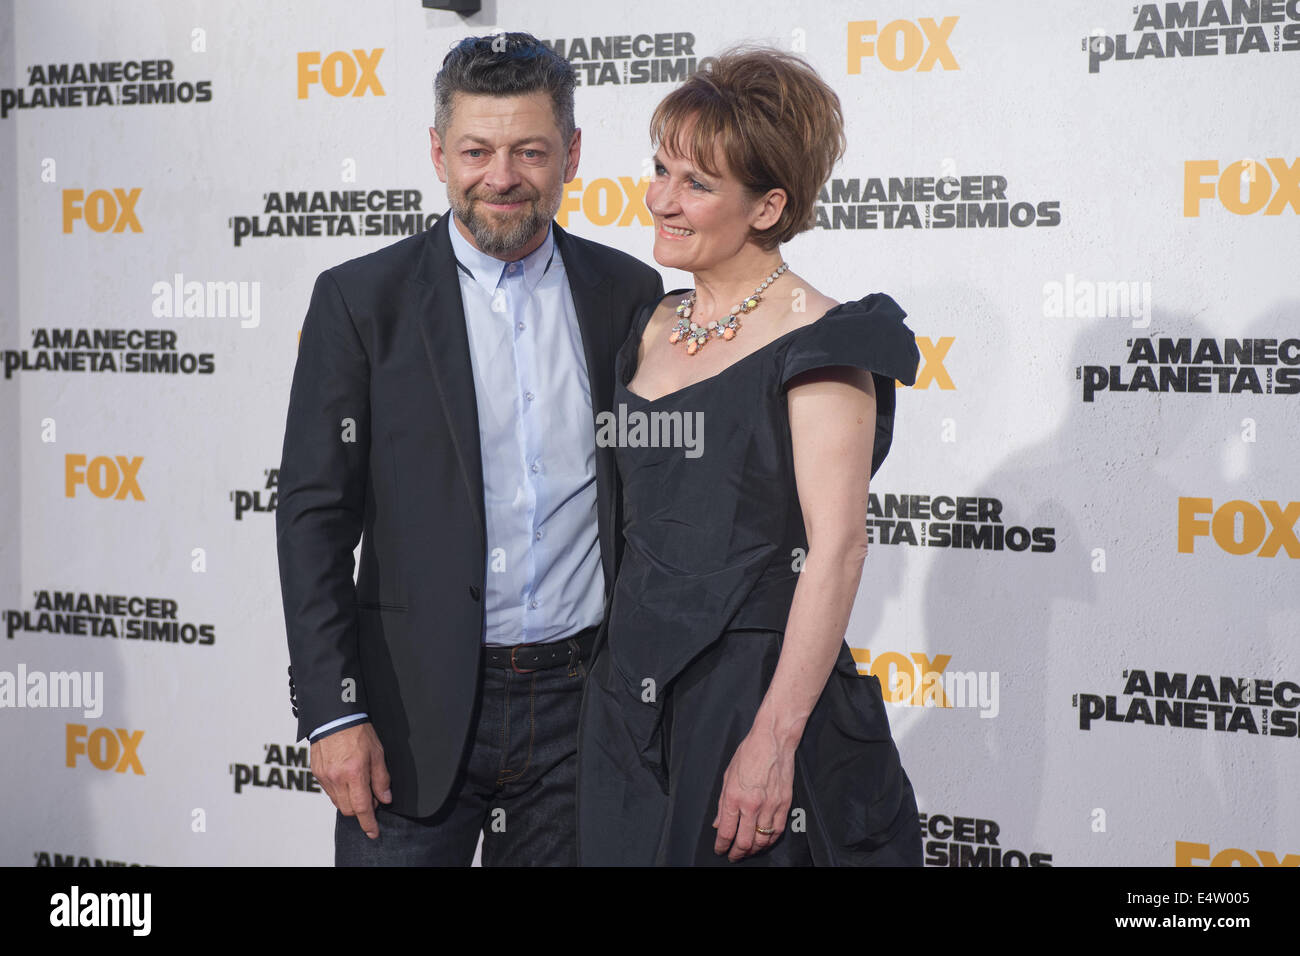 July 16, 2014 - Madrid, Spain - Actor Andy Serkis attends the 'Dawn of the Planet of the Apes' (Amanecer en el Planeta de los Simios) premiere at the Capitol cinema on July 16, 2014 in Madrid, Spain. (Photo by Oscar Gonzalez/NurPhoto) (Credit Image: © Oscar Gonzalez/NurPhoto/ZUMA Wire) Stock Photo